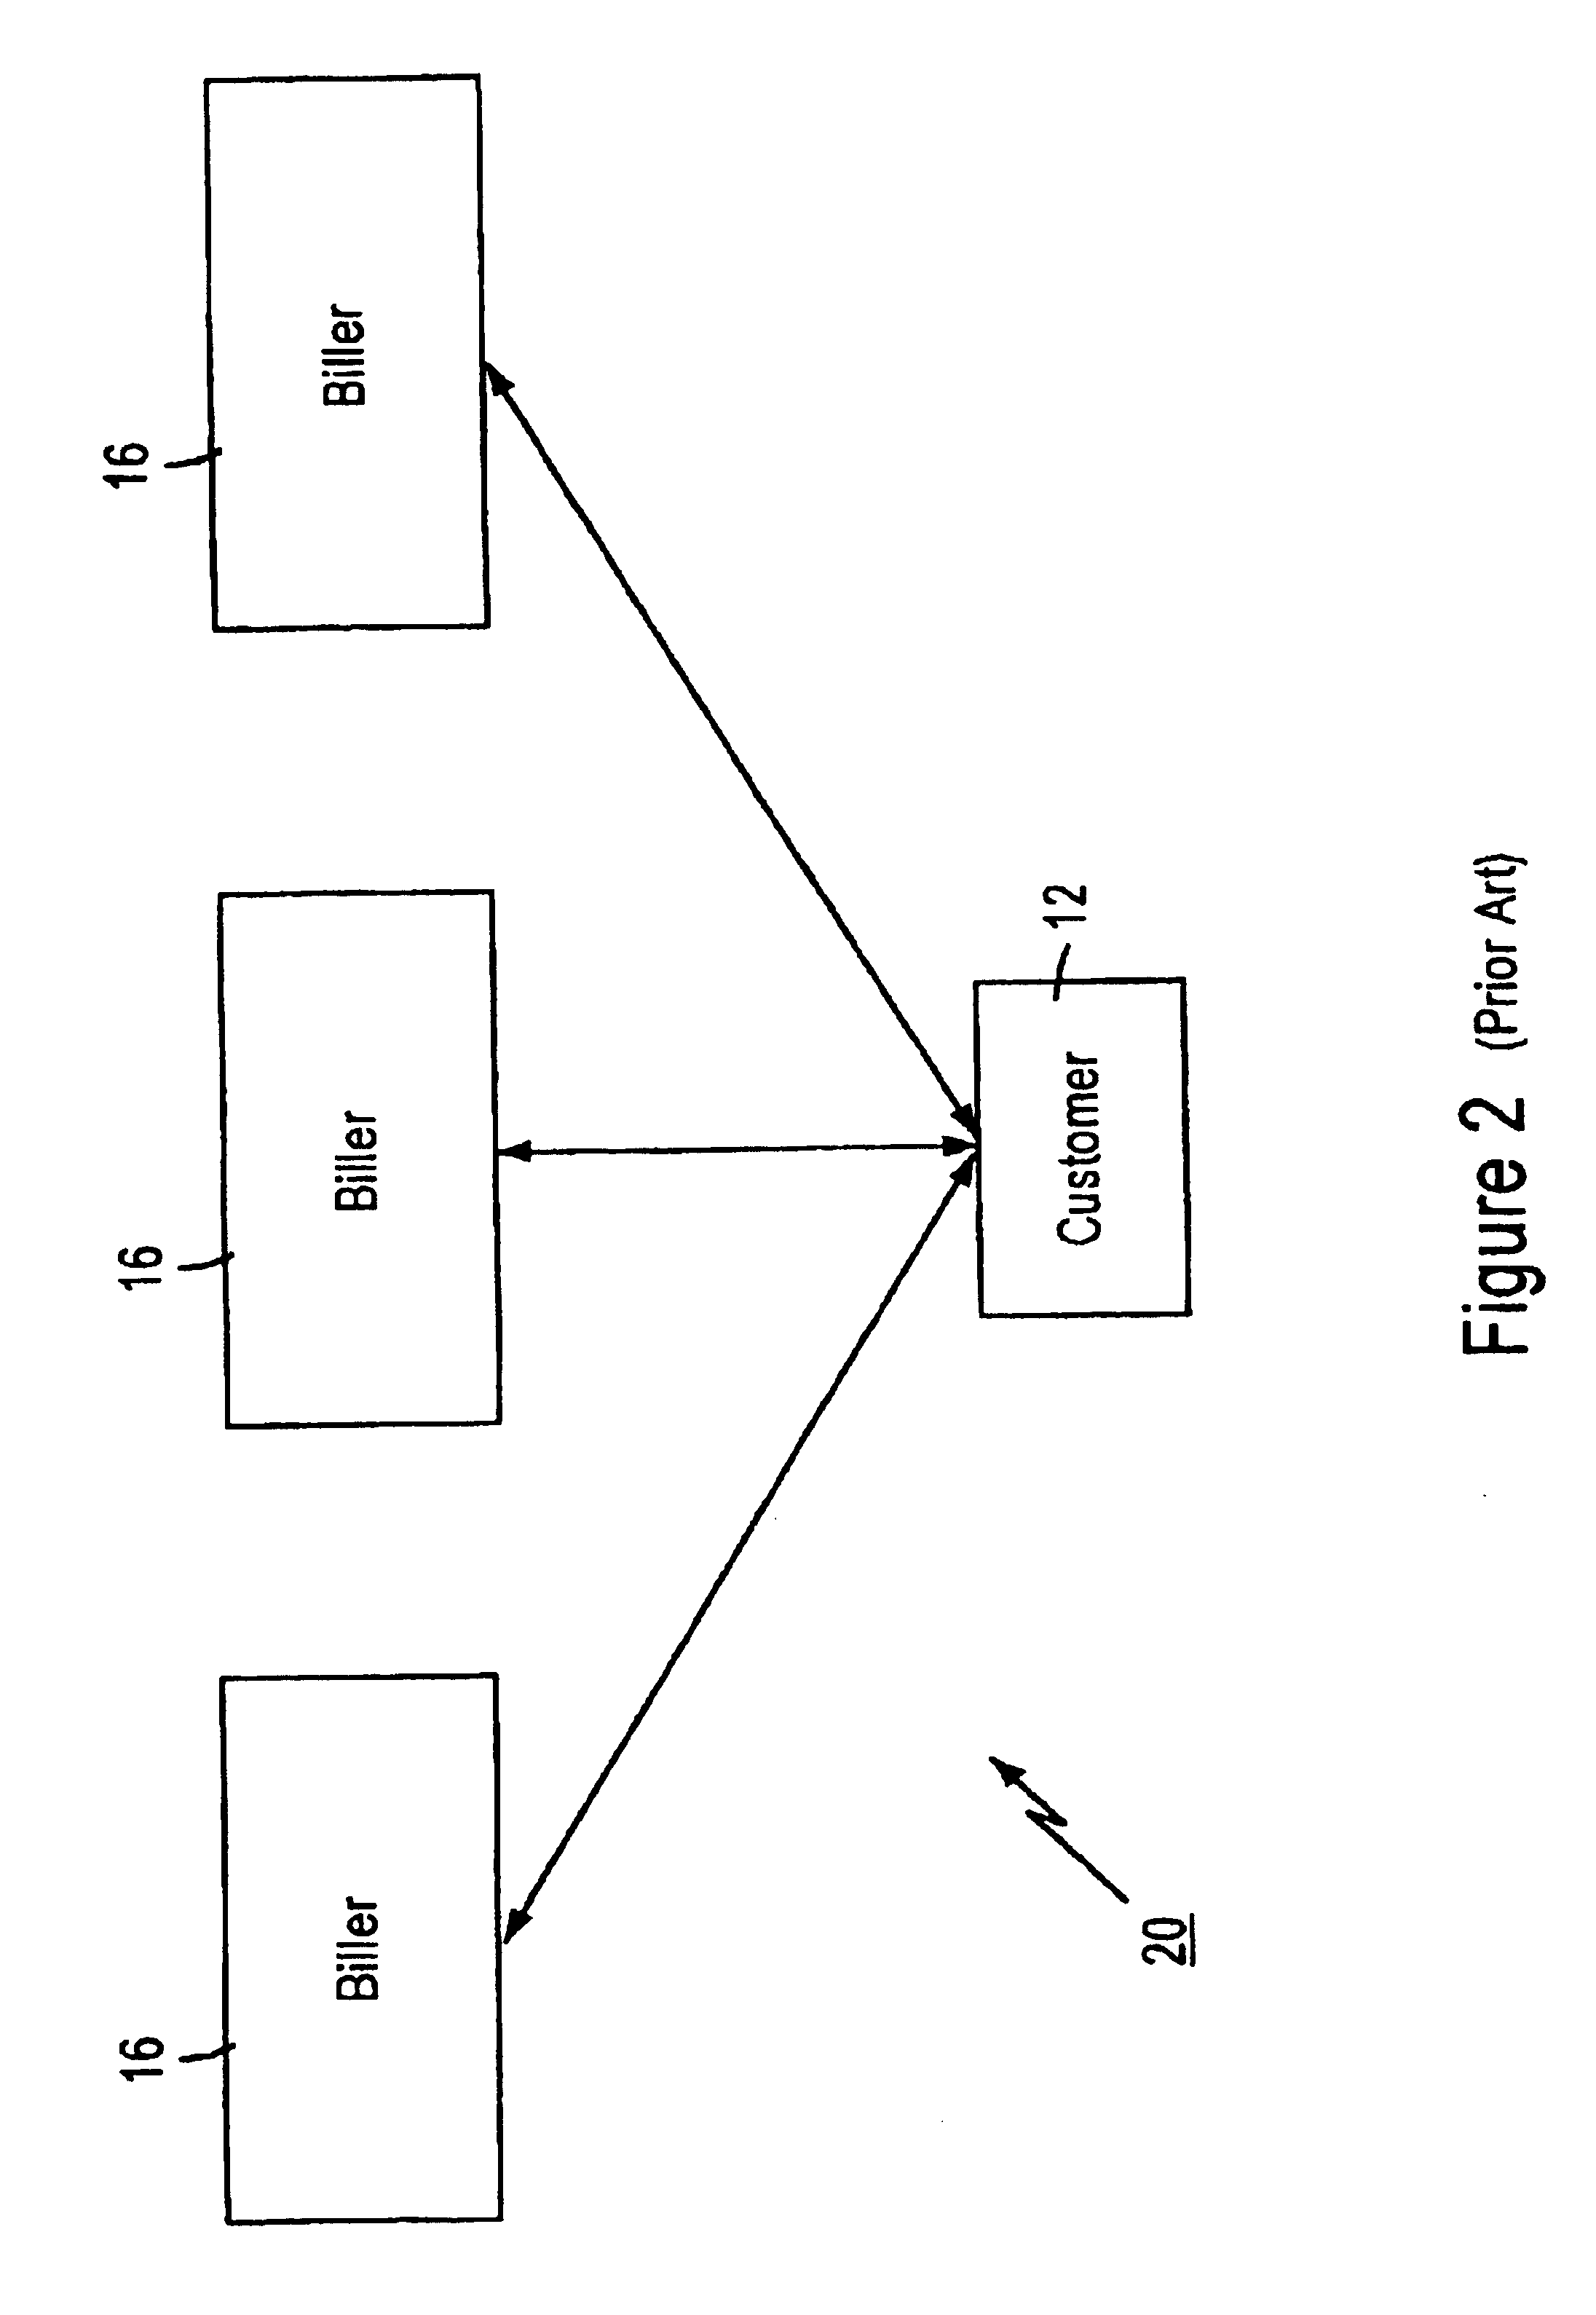 Electronic bill presentment technique with enhanced biller control